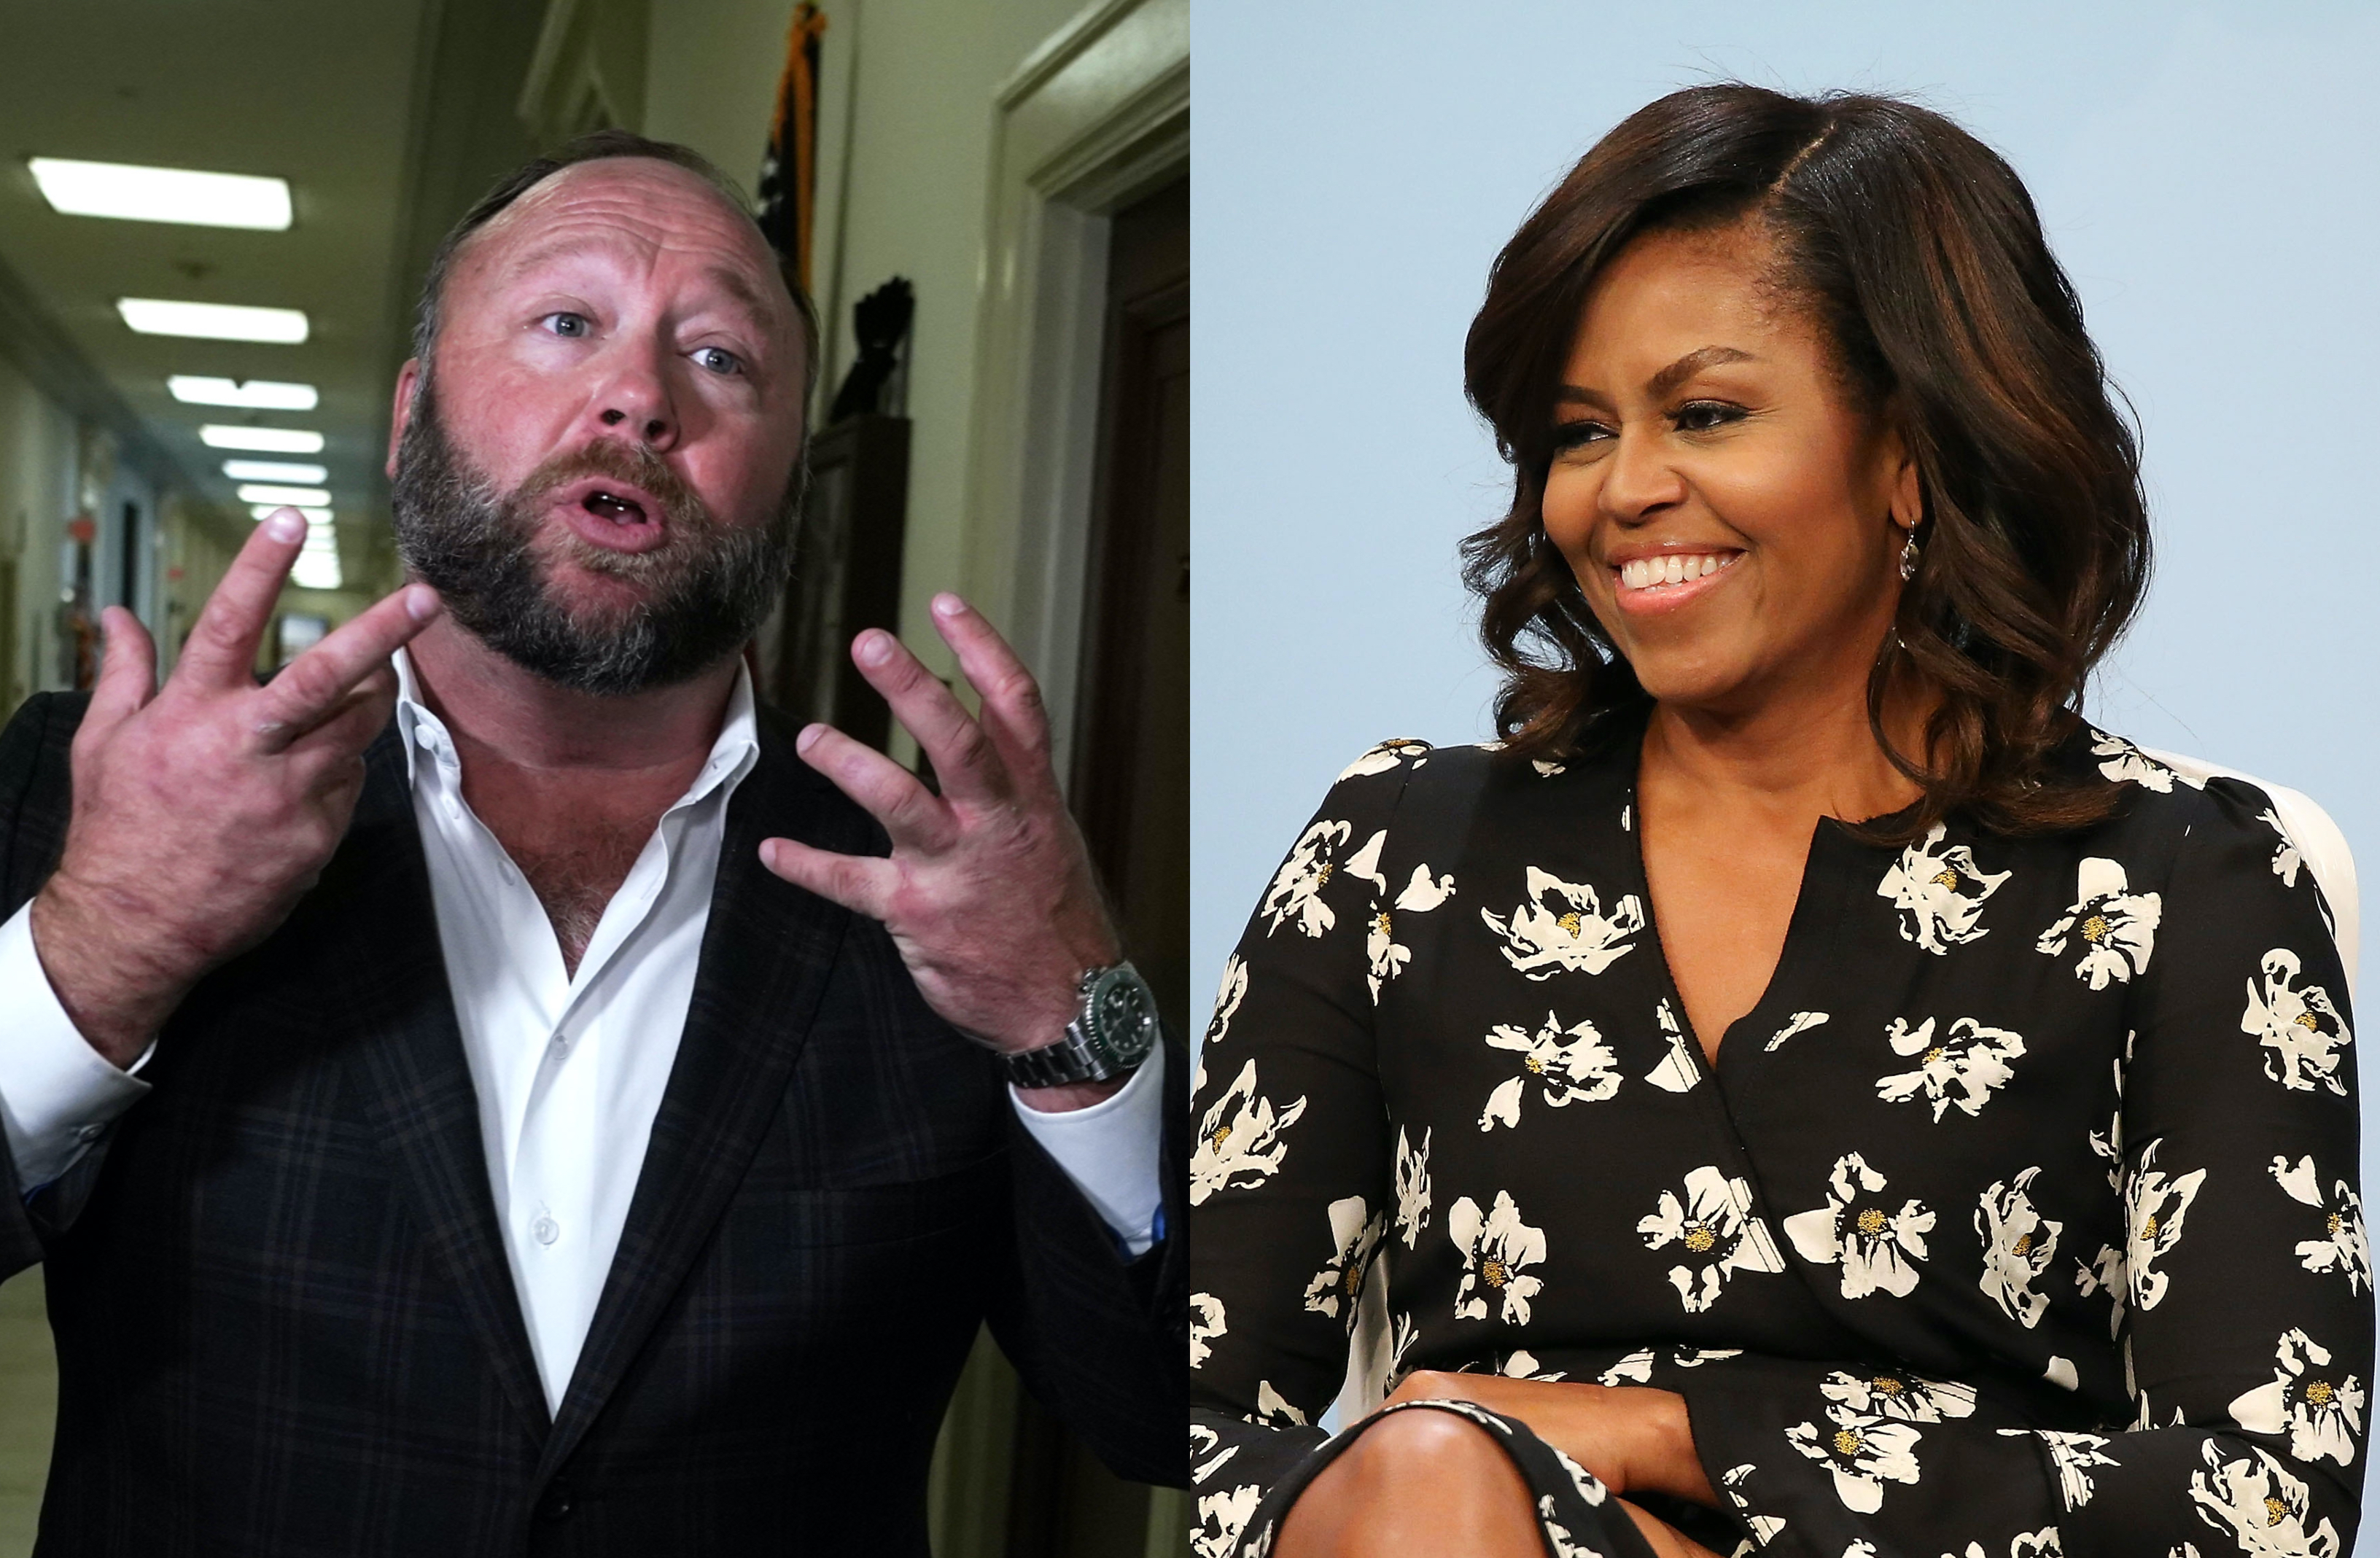 Michelle Obama Sex Porn - Conspiracy theorist claims Michelle Obama is transgender. Yes, really